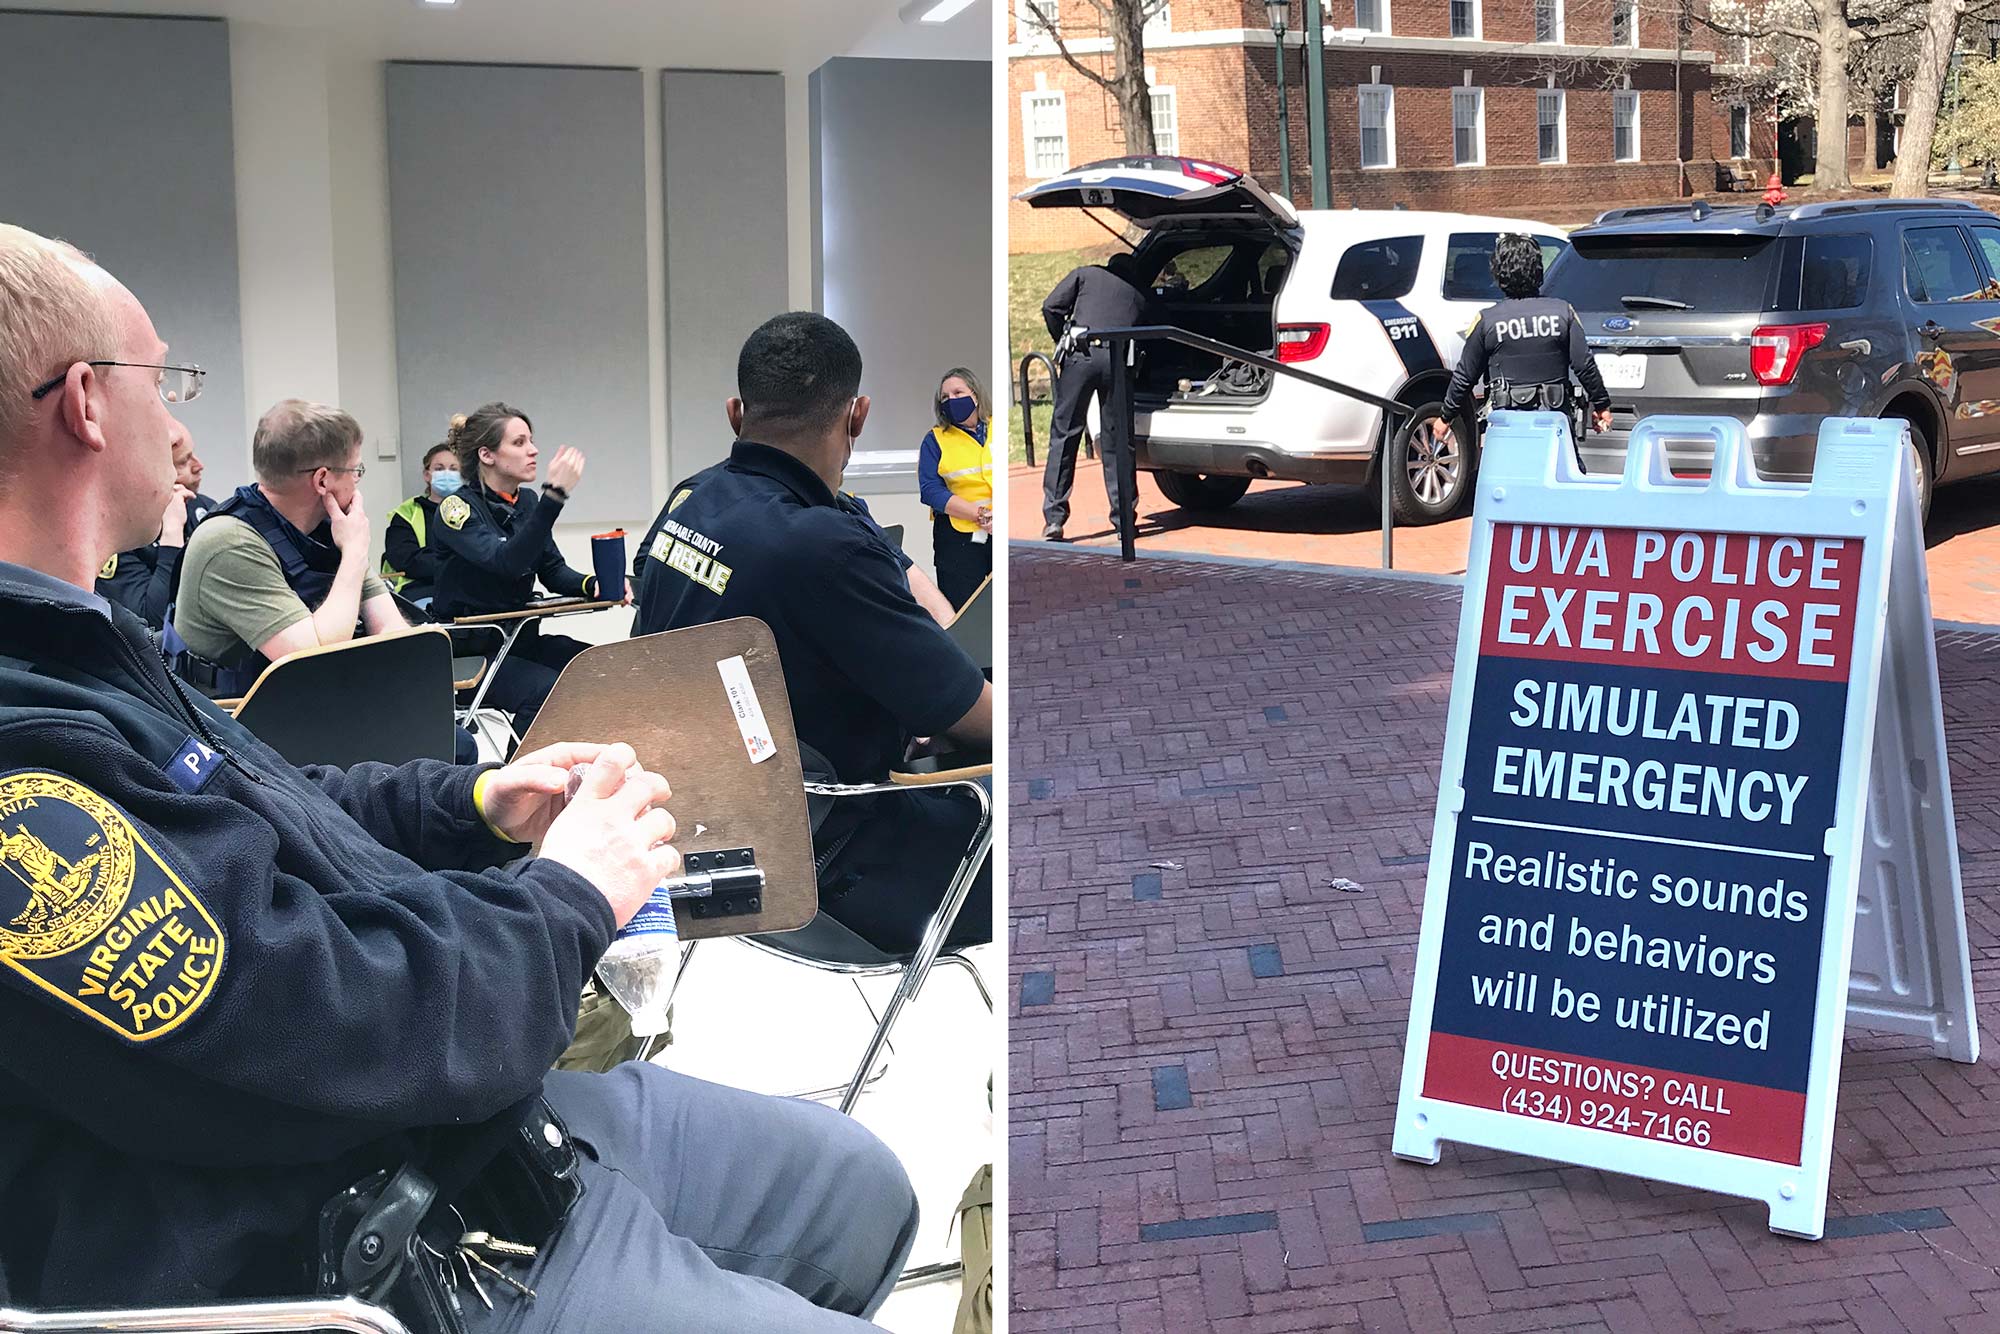 Left, police officers sitting at desks in a classroom. Right, a sandwich board sign reads UVA Police Exercise, Simulated Emergency, Realistic sounds and behaviors will be utilized